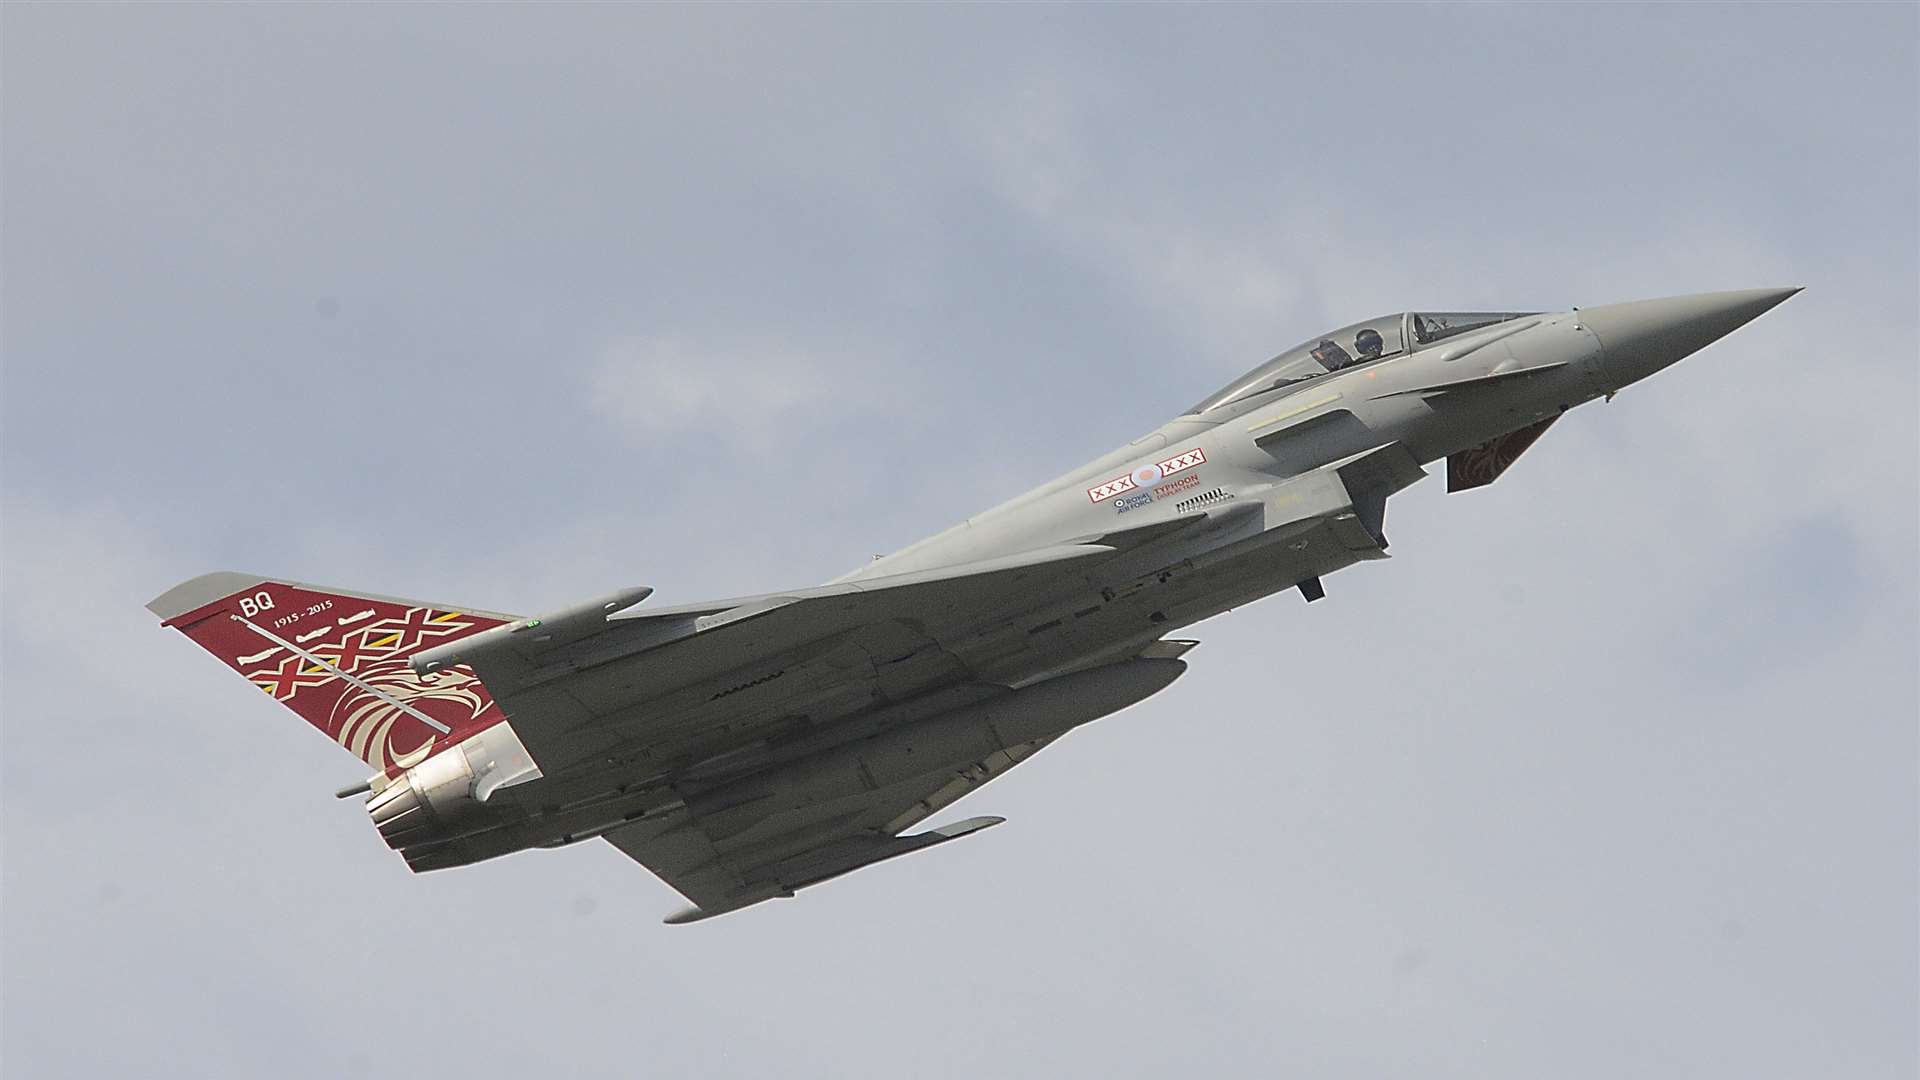 The Eurofighter Typhoon will display at the event